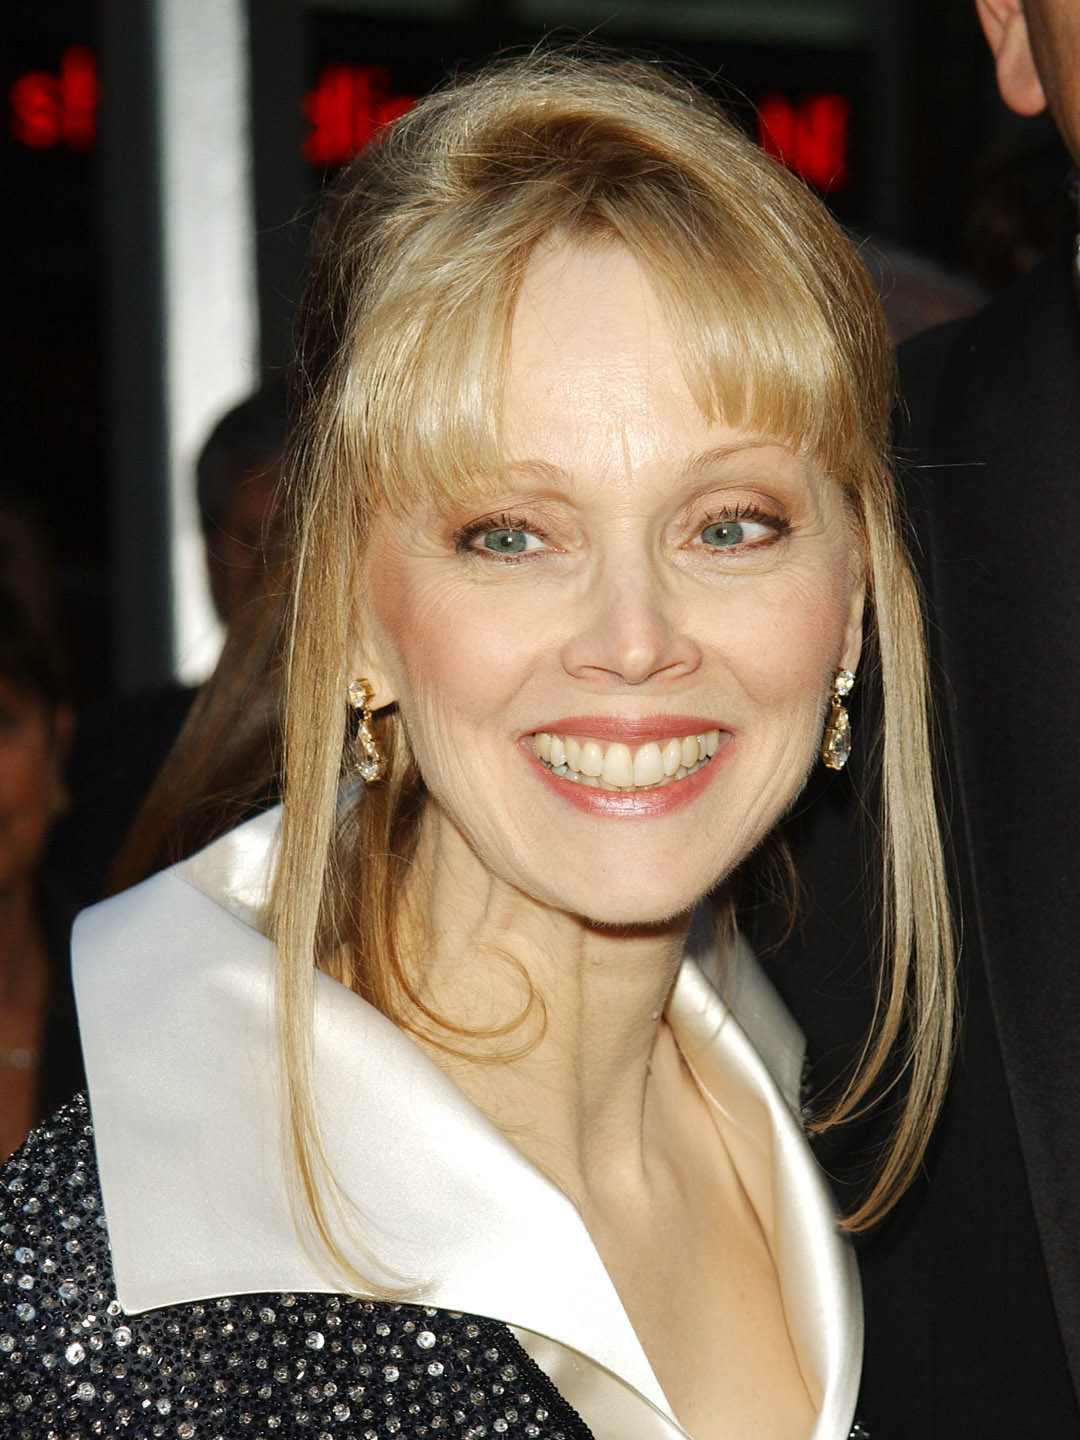 How tall is Shelley Long?